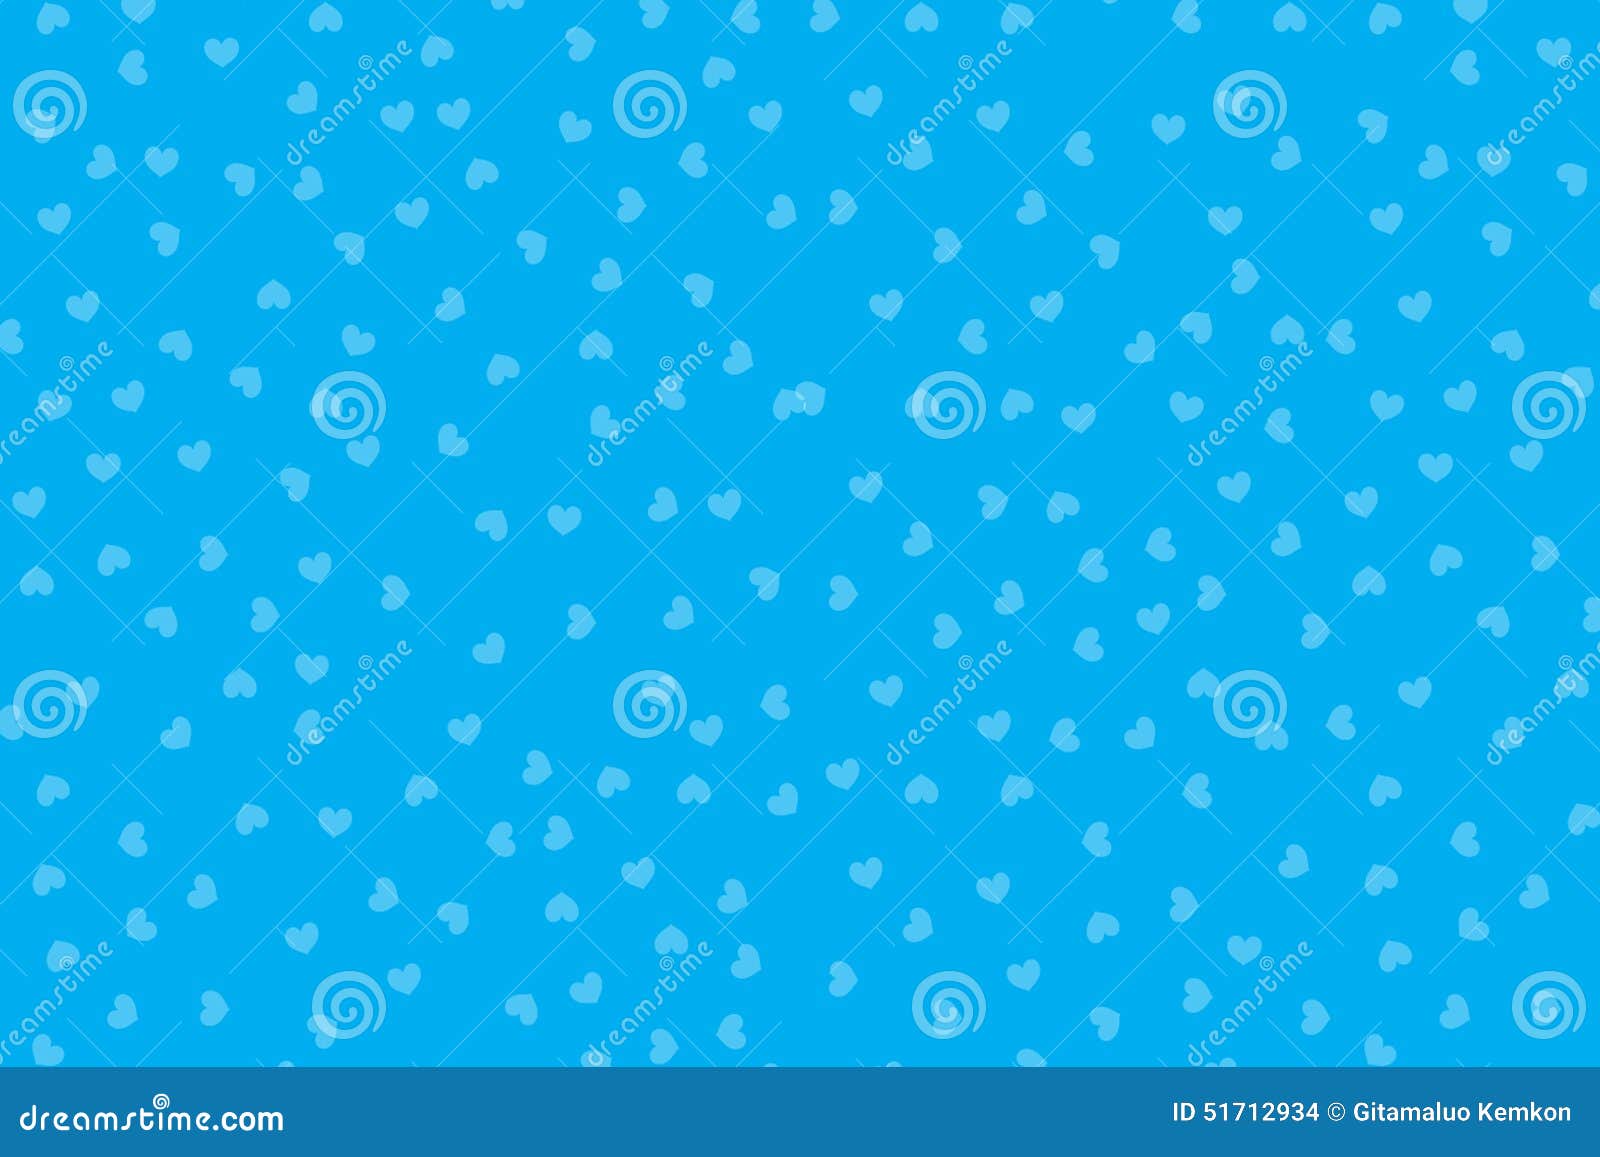 Sky Blue Background Images HD Pictures and Wallpaper For Free Download   Pngtree